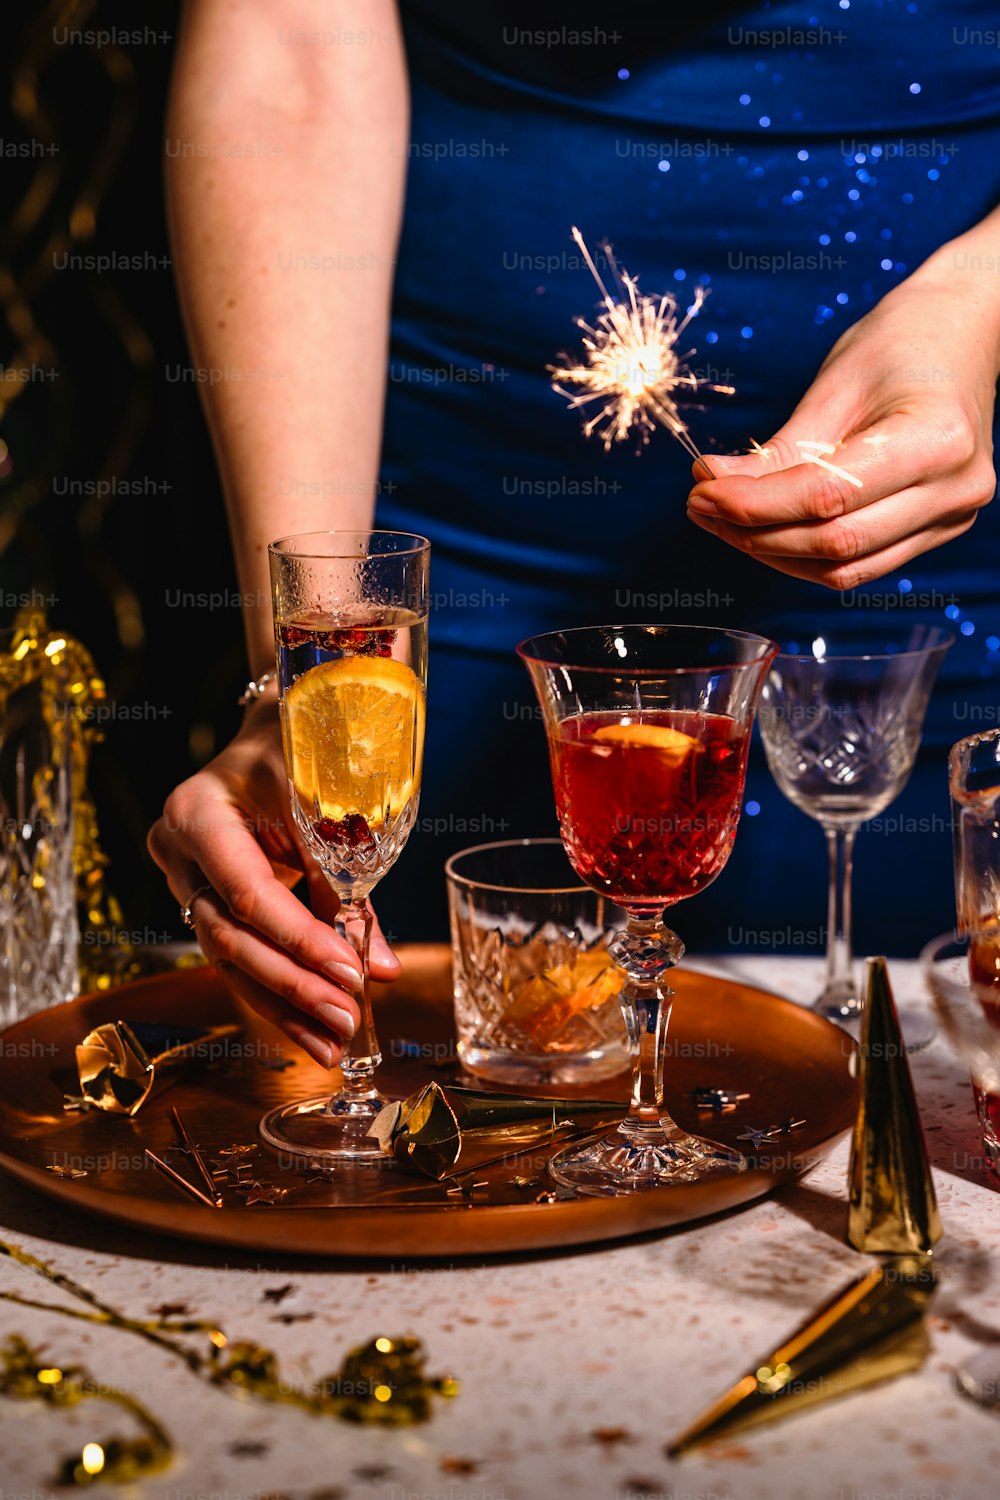 a person holding a sparkler over a tray of glasses